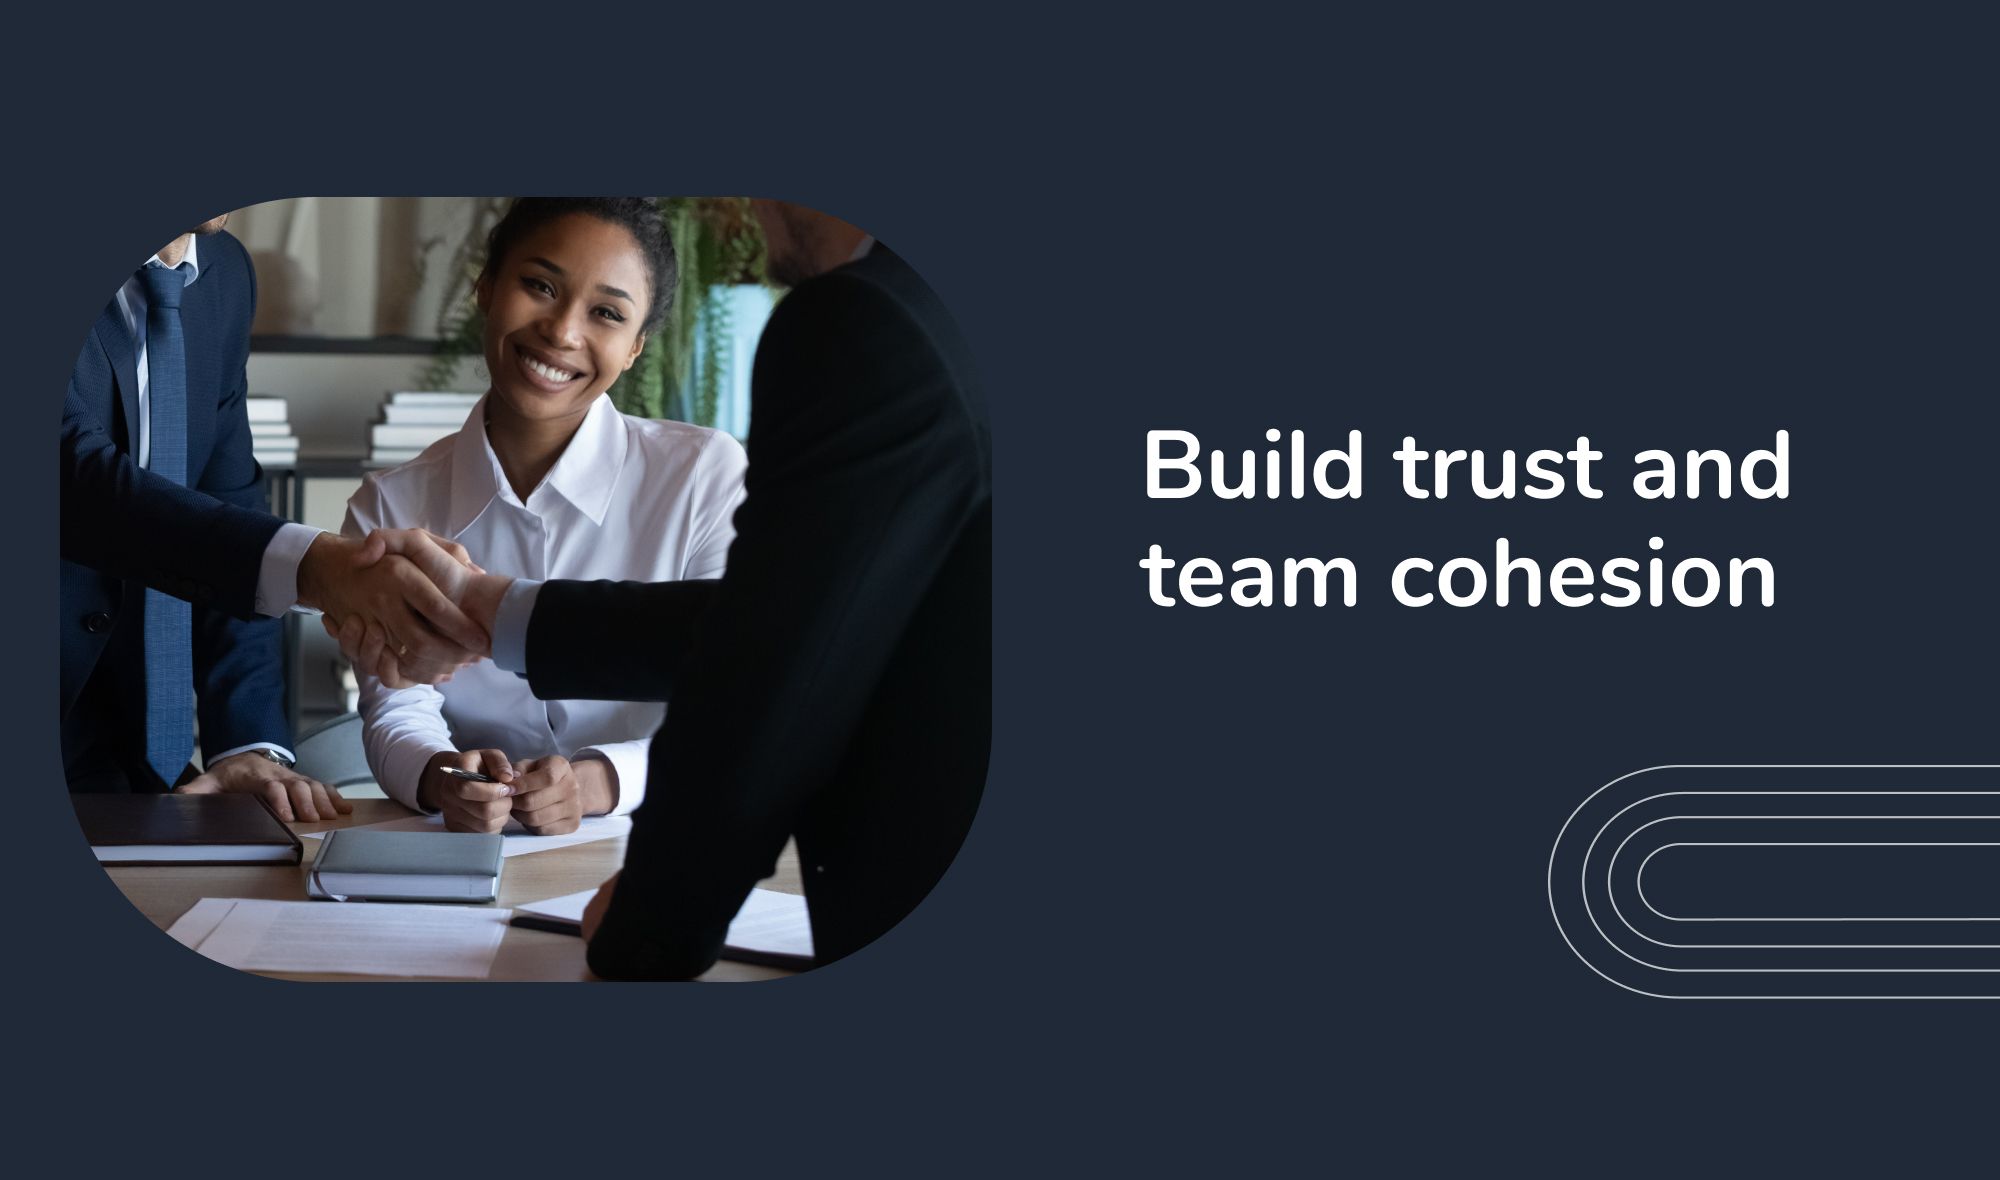 High performance management - Build trust and team cohesion